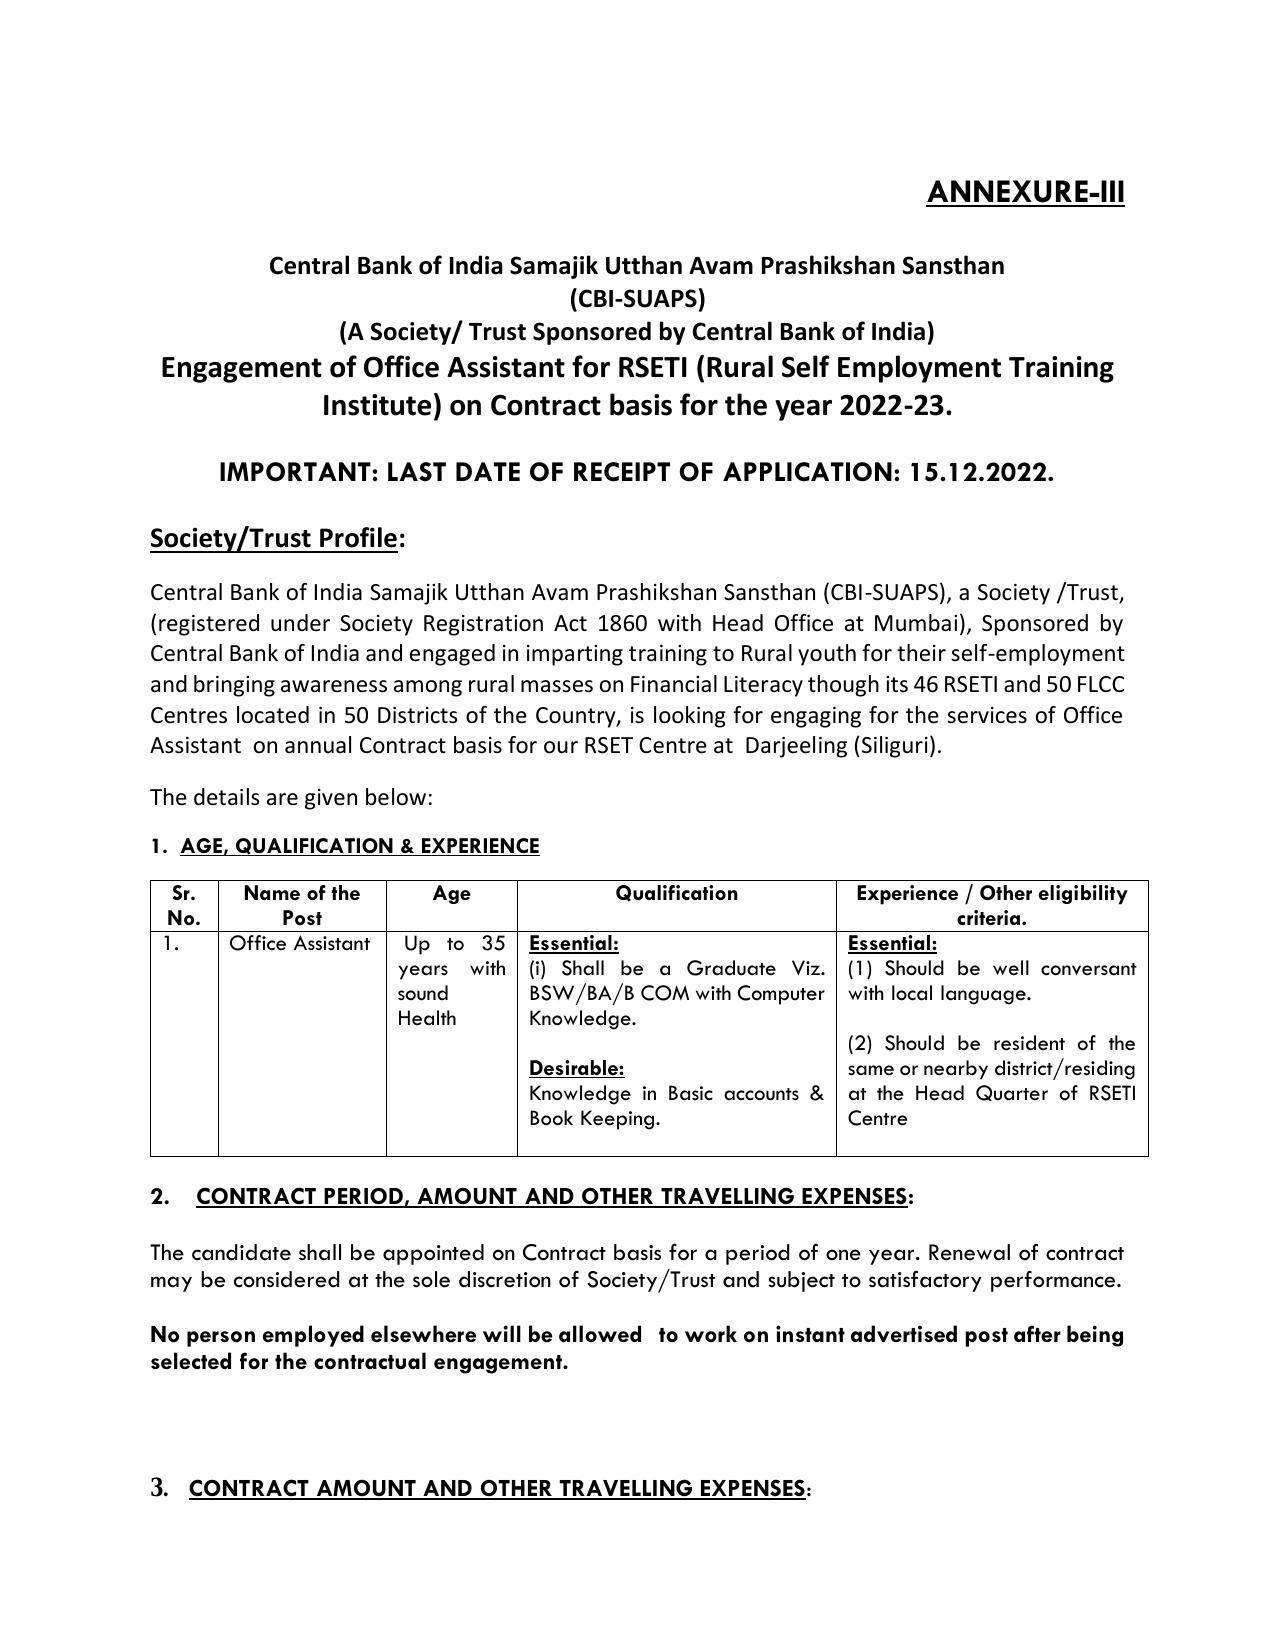 Central Bank of India Invites Application for Office Assistant Recruitment 2022 - Page 3